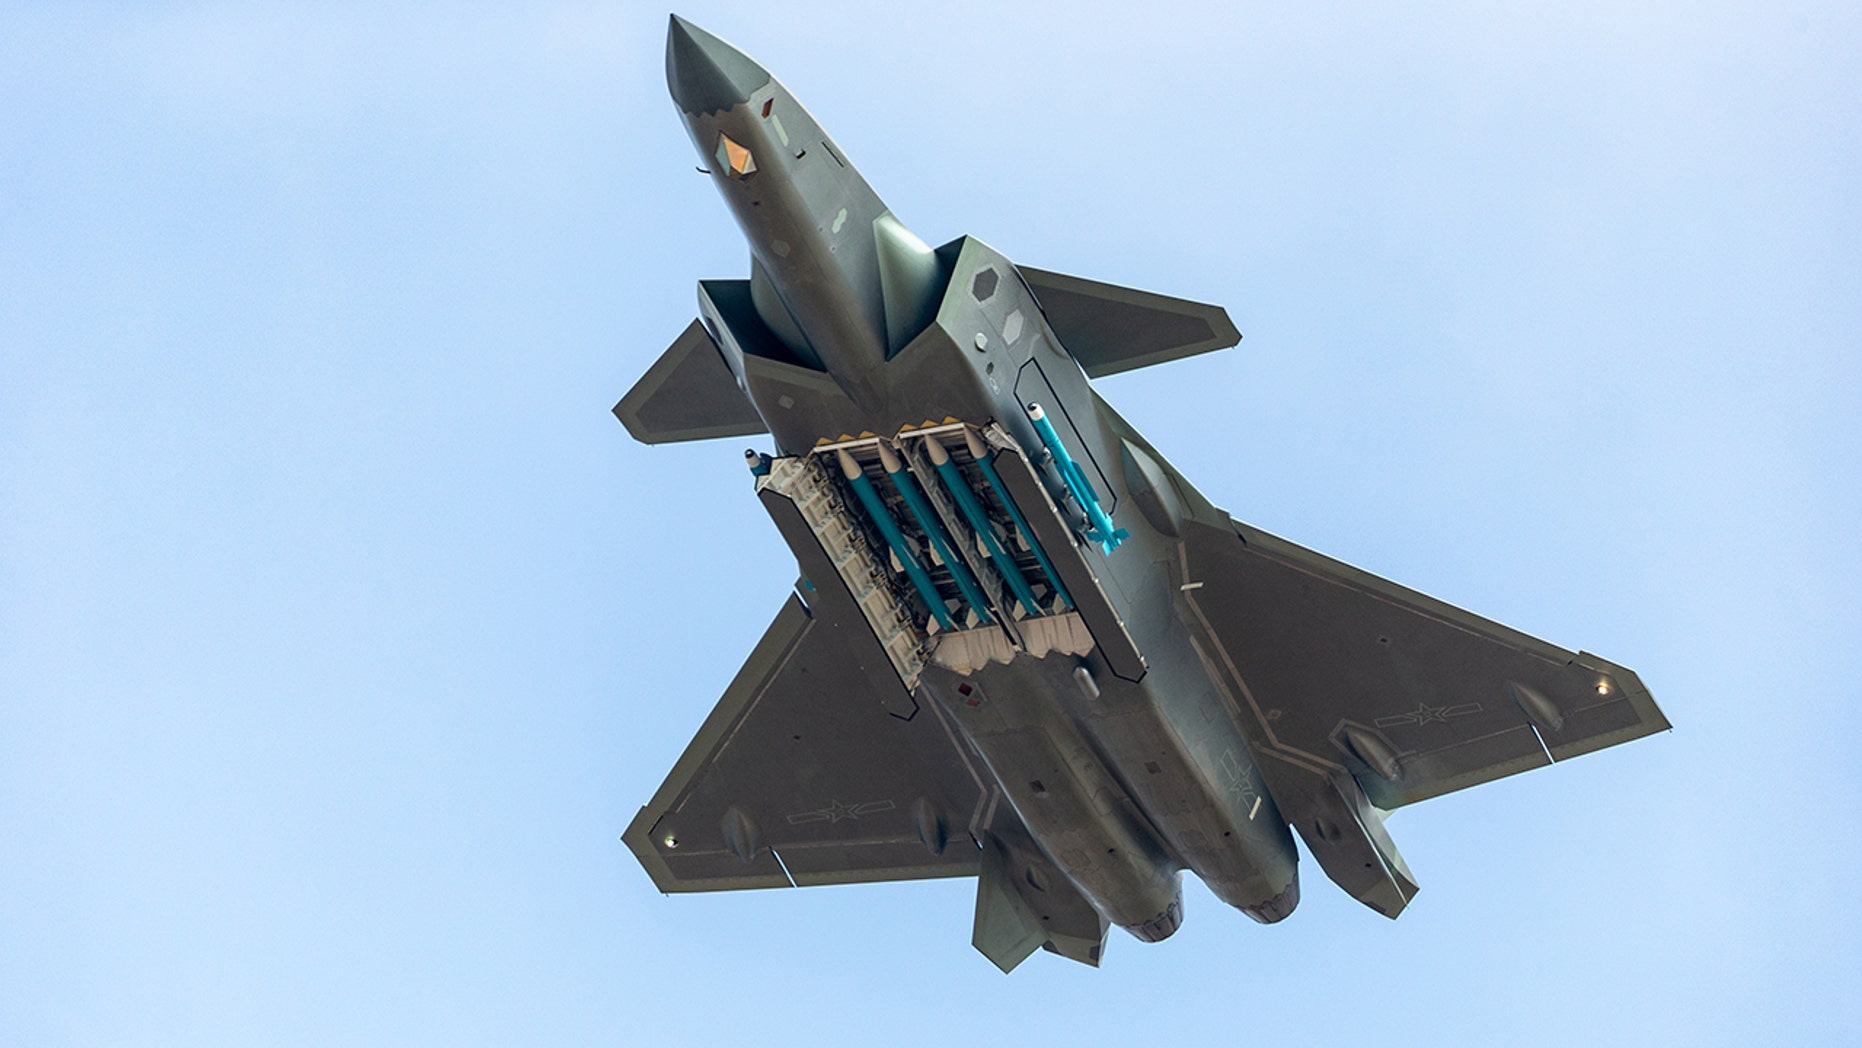 China's stealth fighter jets feature missiles during airshow show of